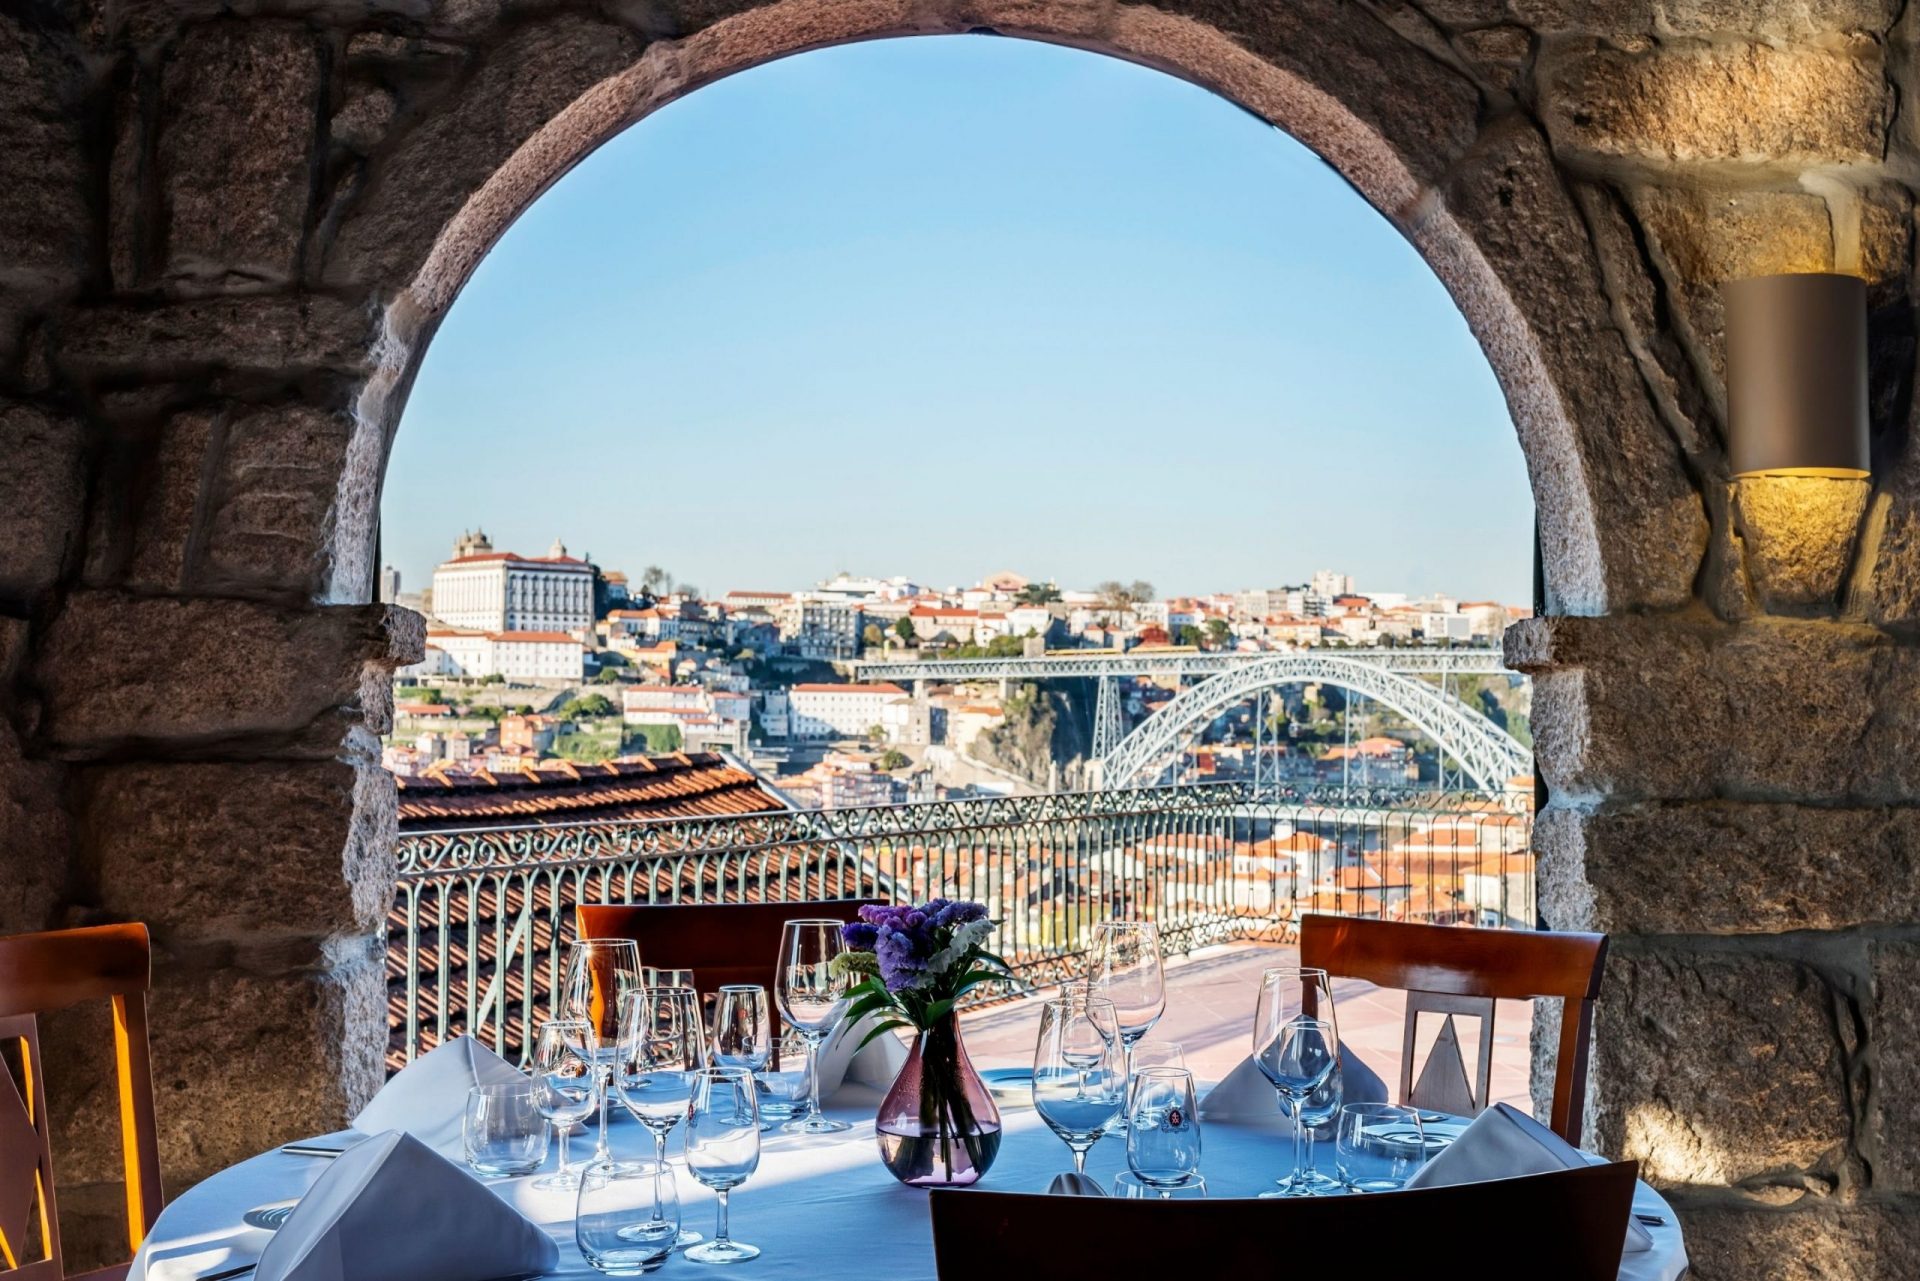 Exclusive Itinerary for 14 days in Portugal